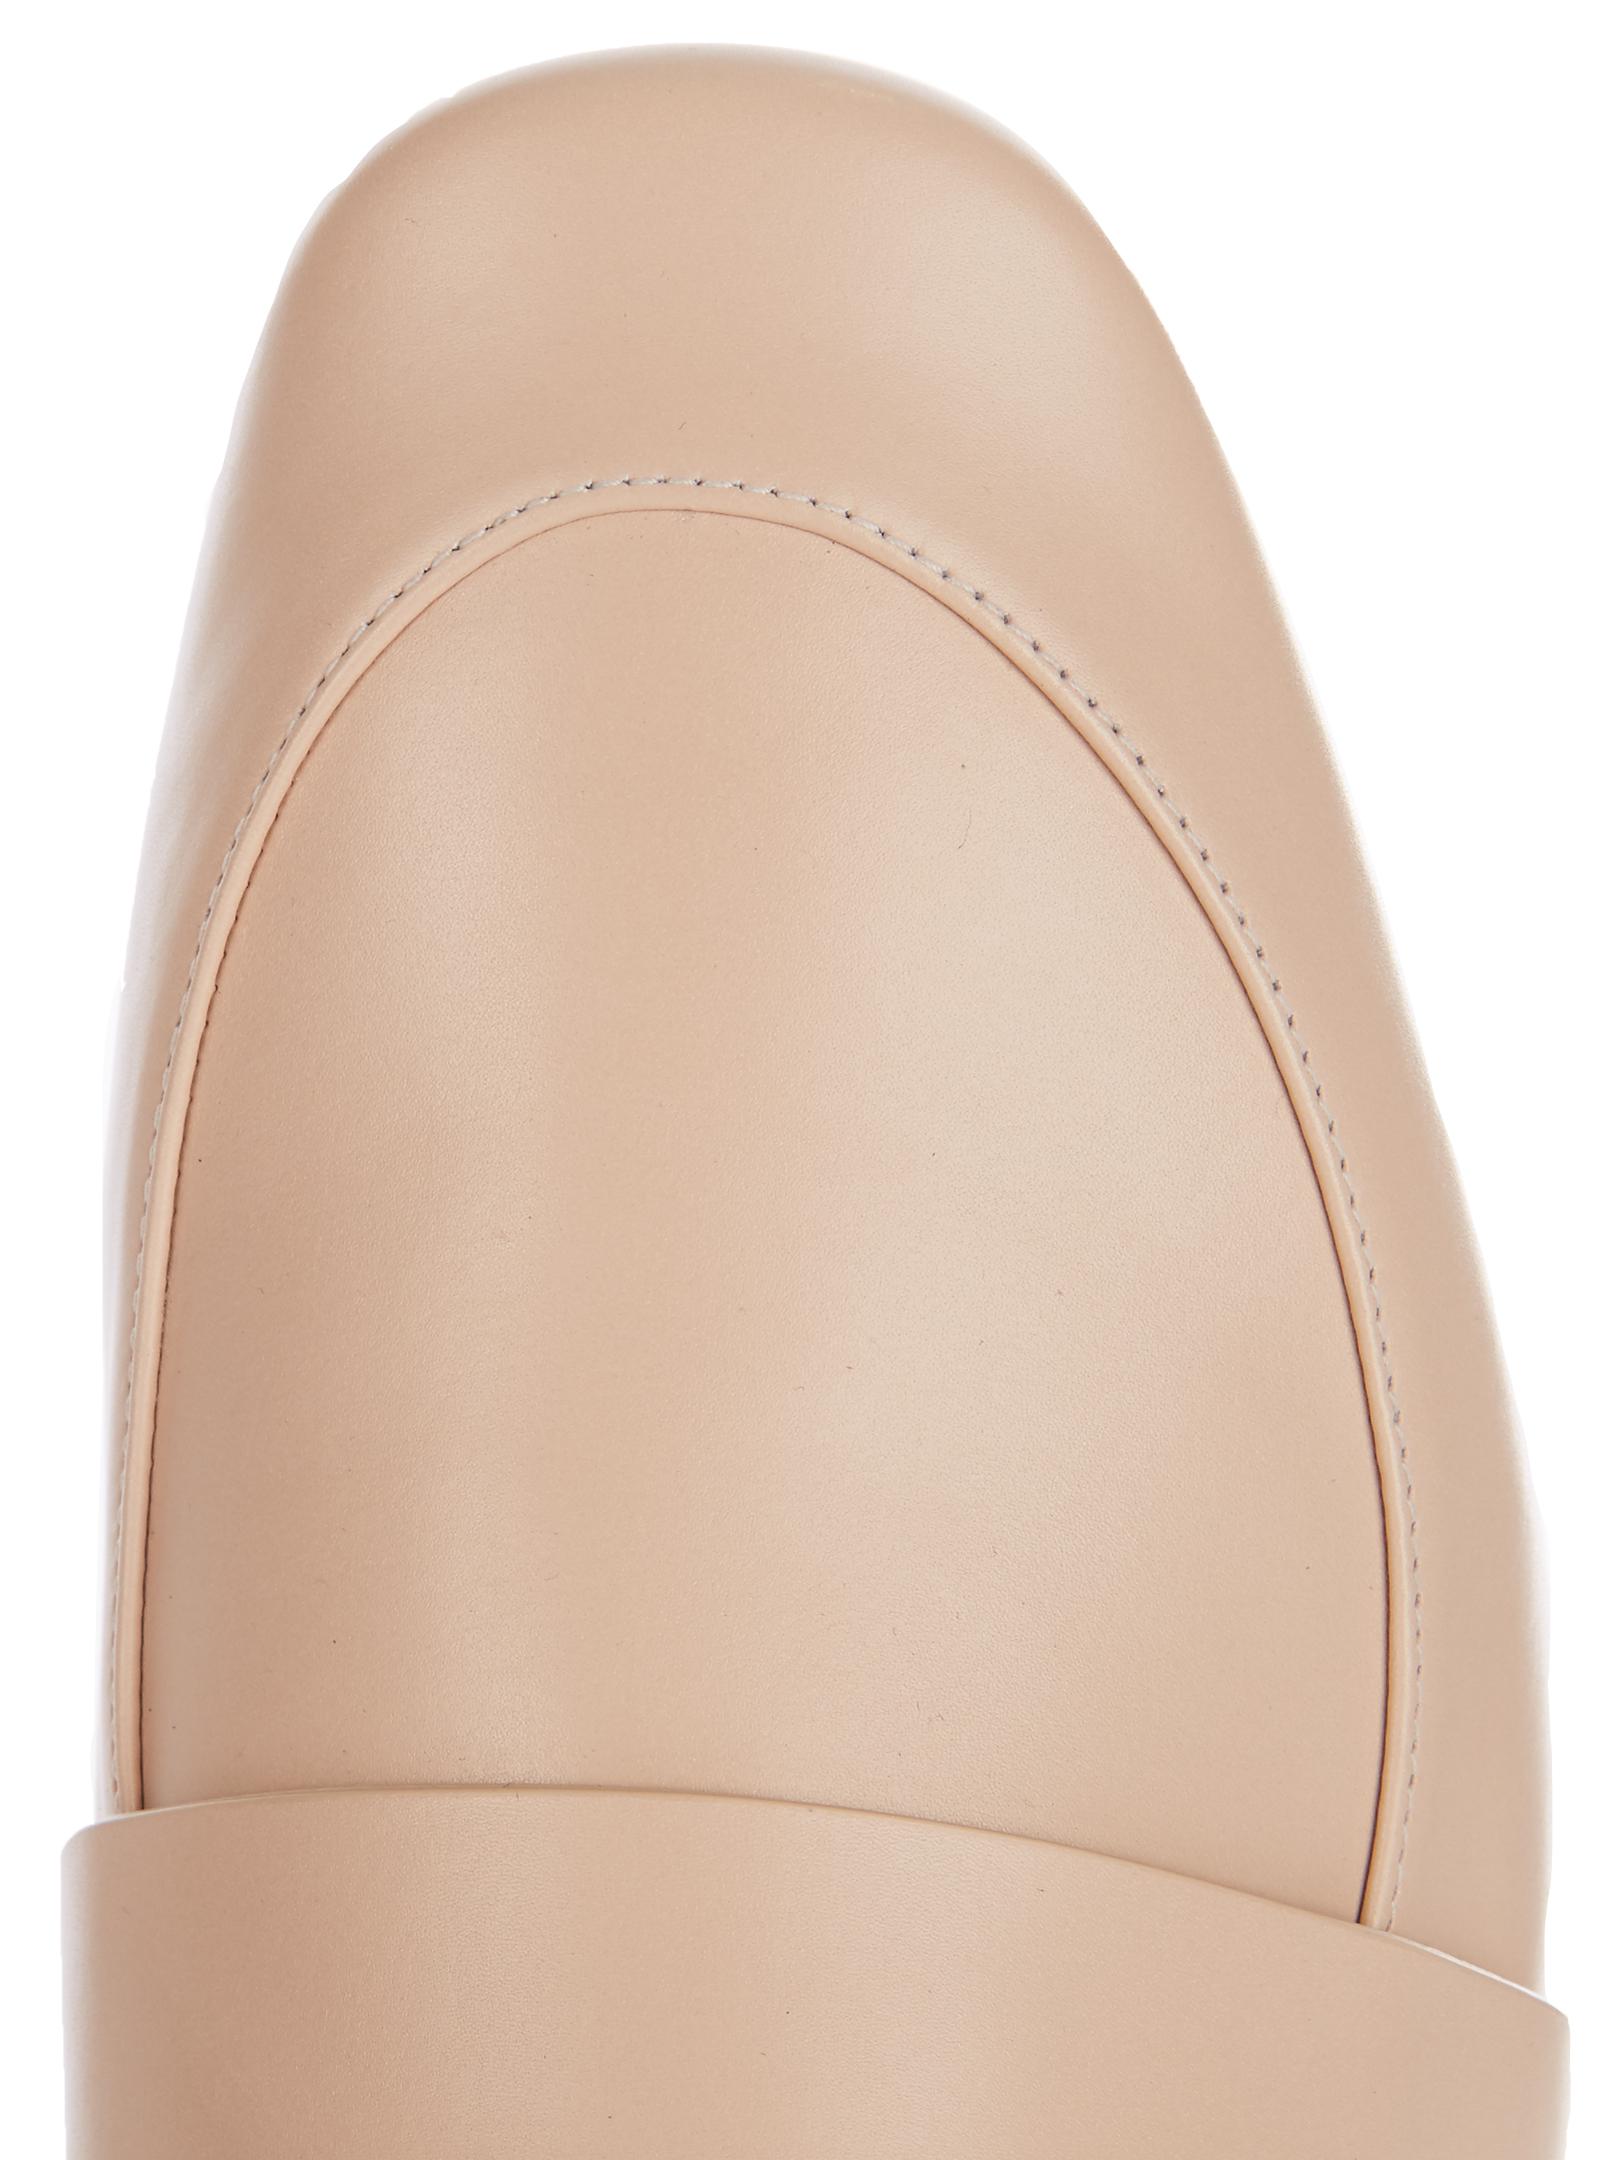 nude backless loafers